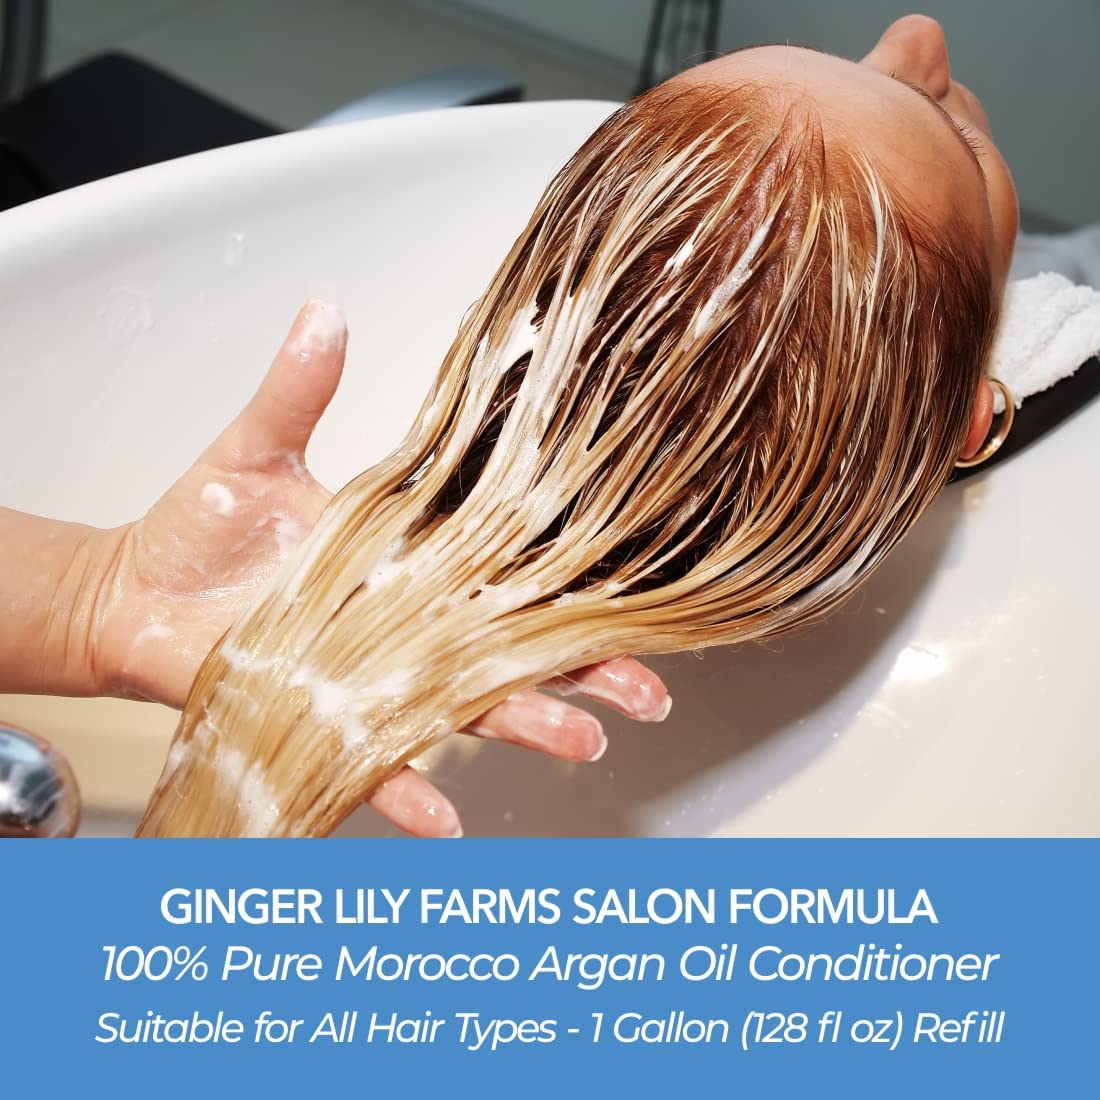 Ginger Lily Farms Salon Formula 100% Pure Morocco Argan Oil Conditioner for All Hair Types, 100% Vegan & Cruelty-Free, 128 Fl Oz (Pack of 4)